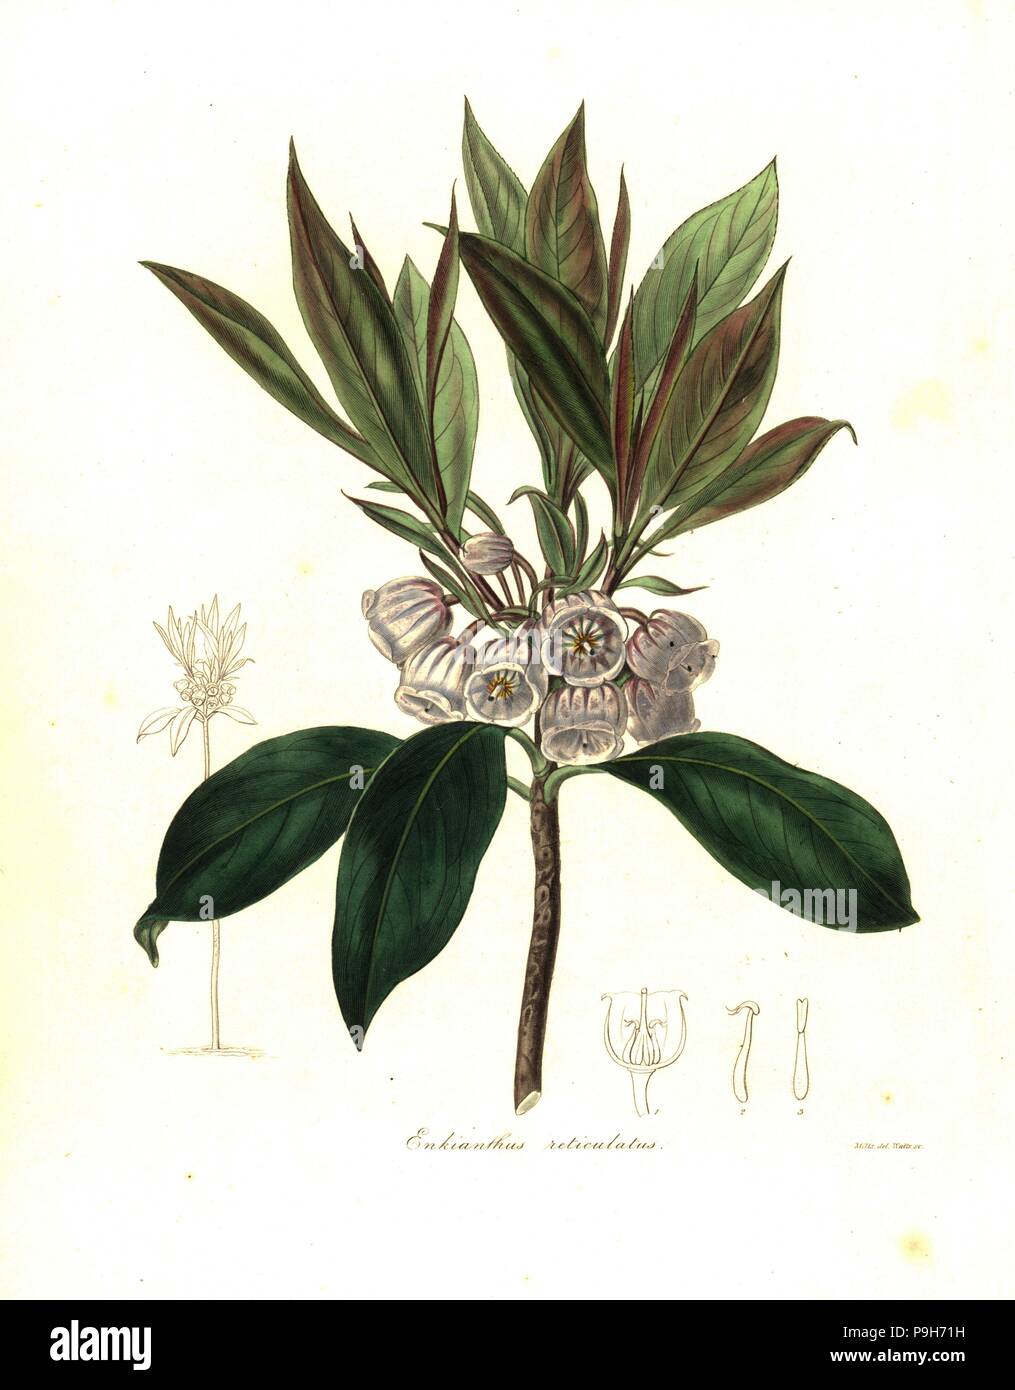 Enkianthus quinqueflorus (netted enkianthus, Enkiathus reticulatus). Handcoloured copperplate engraving by Watts after a botanical illustration by Mills from Benjamin Maund and the Rev. John Stevens Henslow's The Botanist, London, 1836. Stock Photo